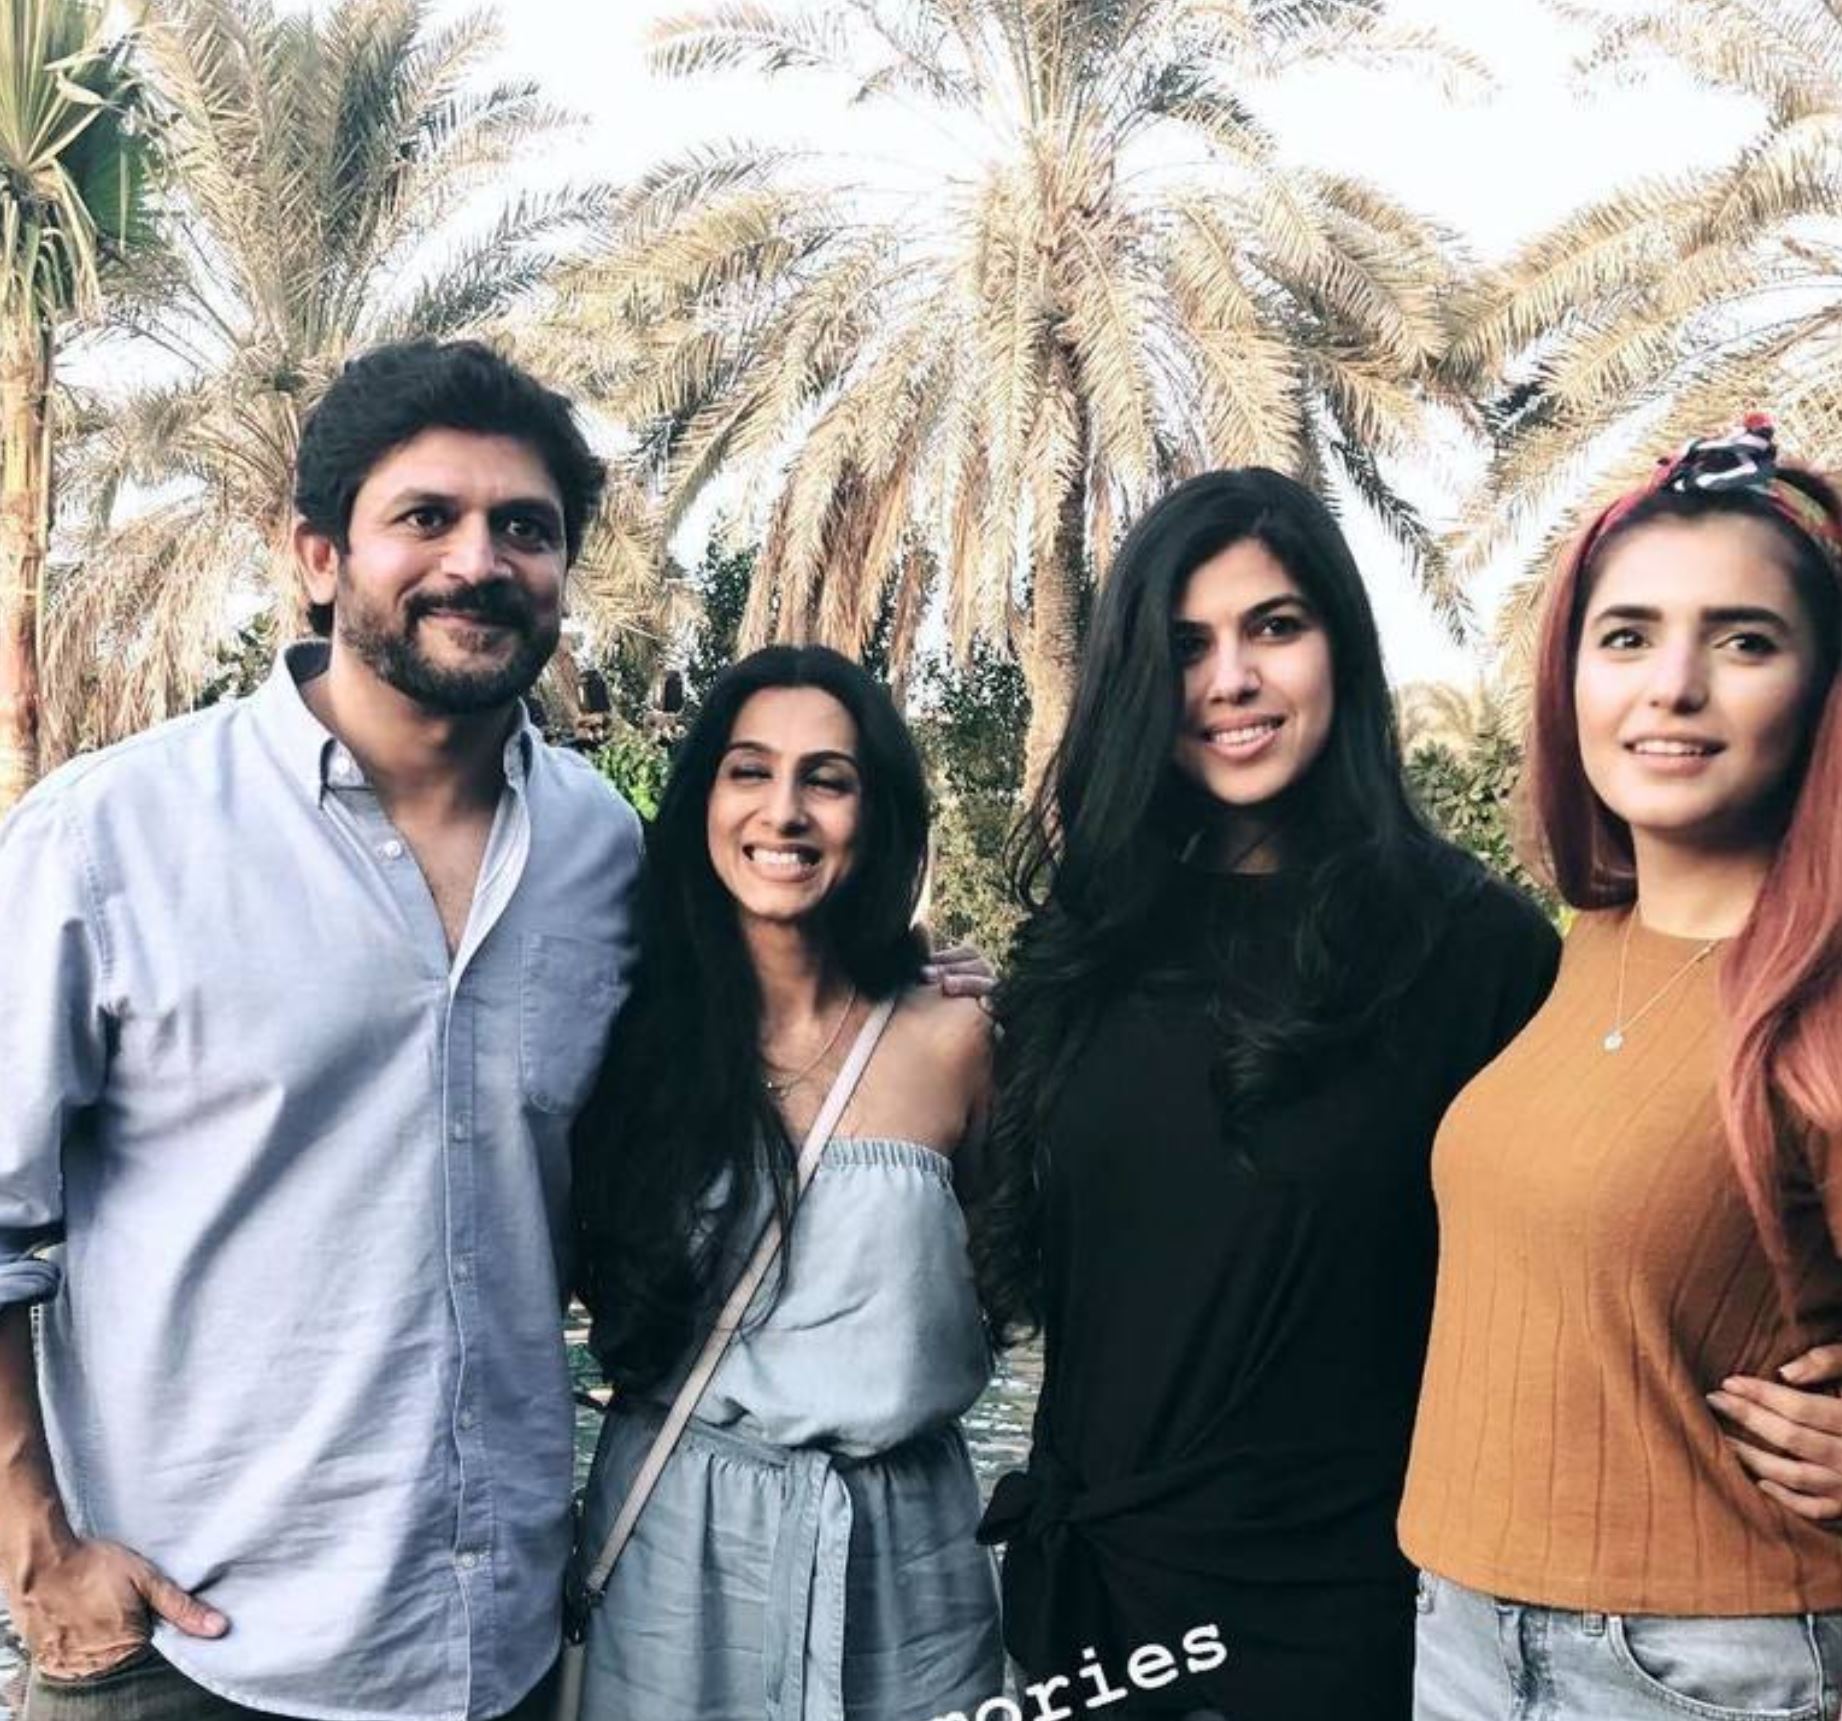 Momina Mustehsan Celebrates Diwali With Her Friends